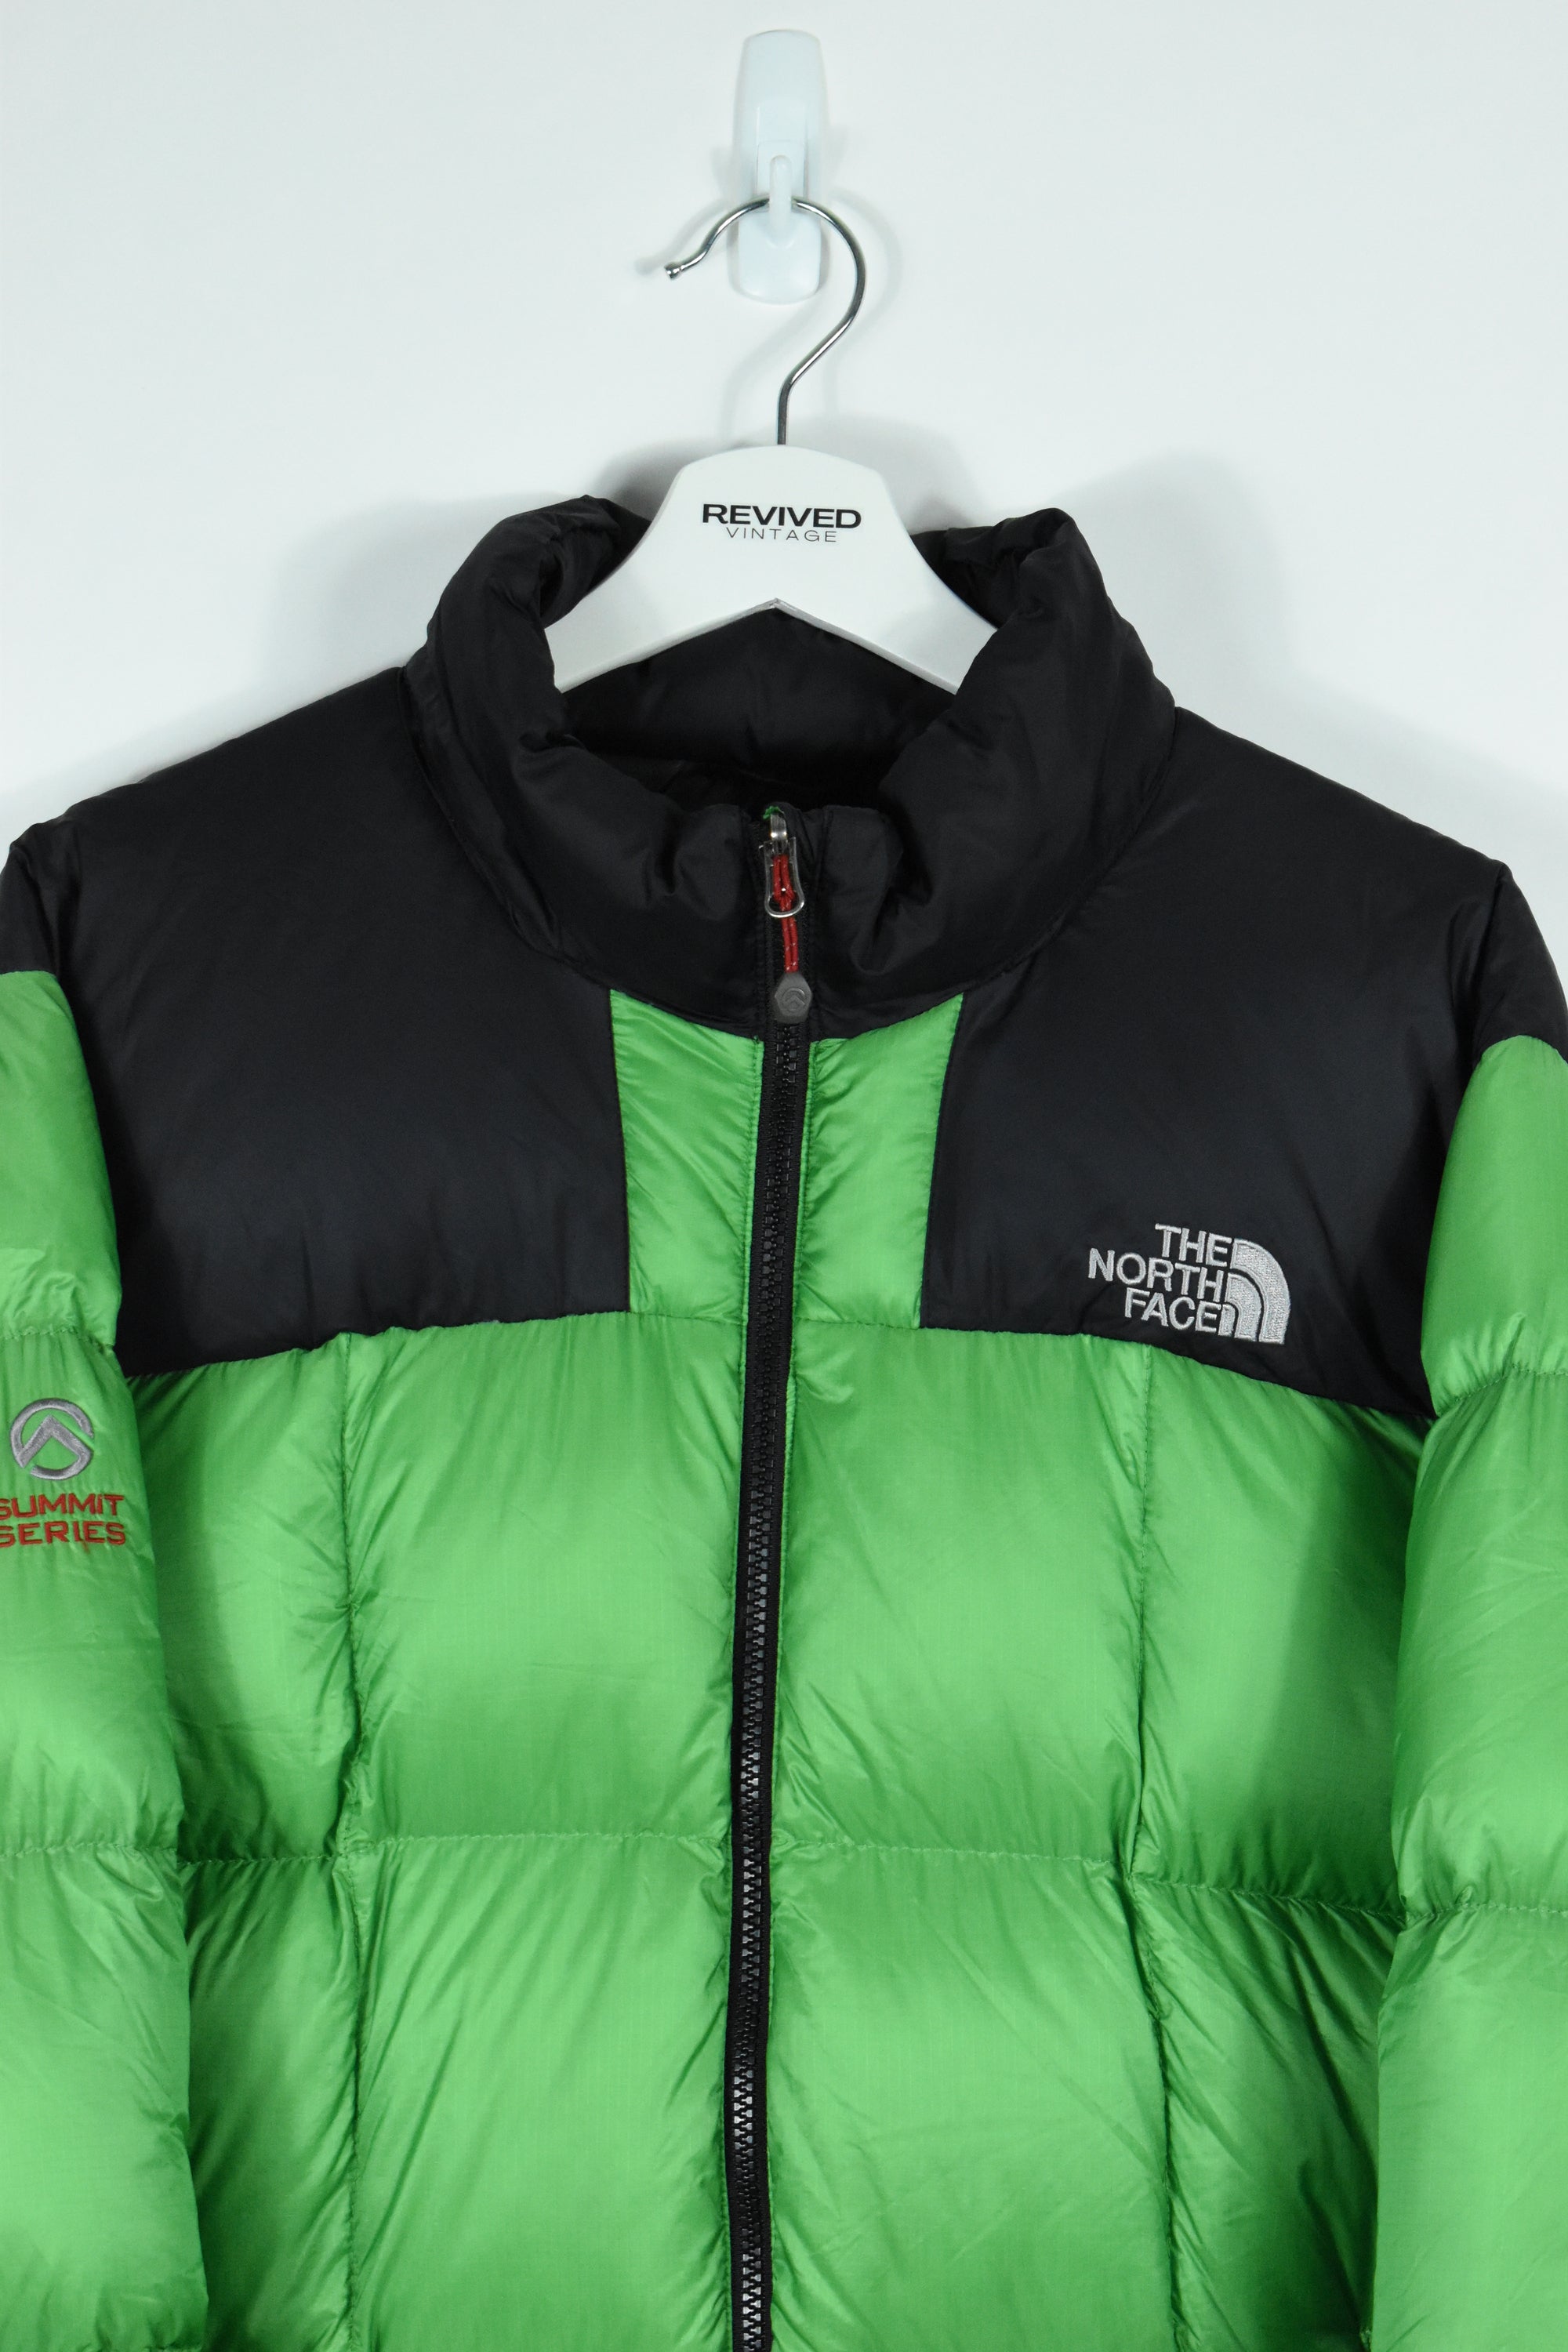 Vintage North Face Green Puffer 800 Summit Series LARGE /XL